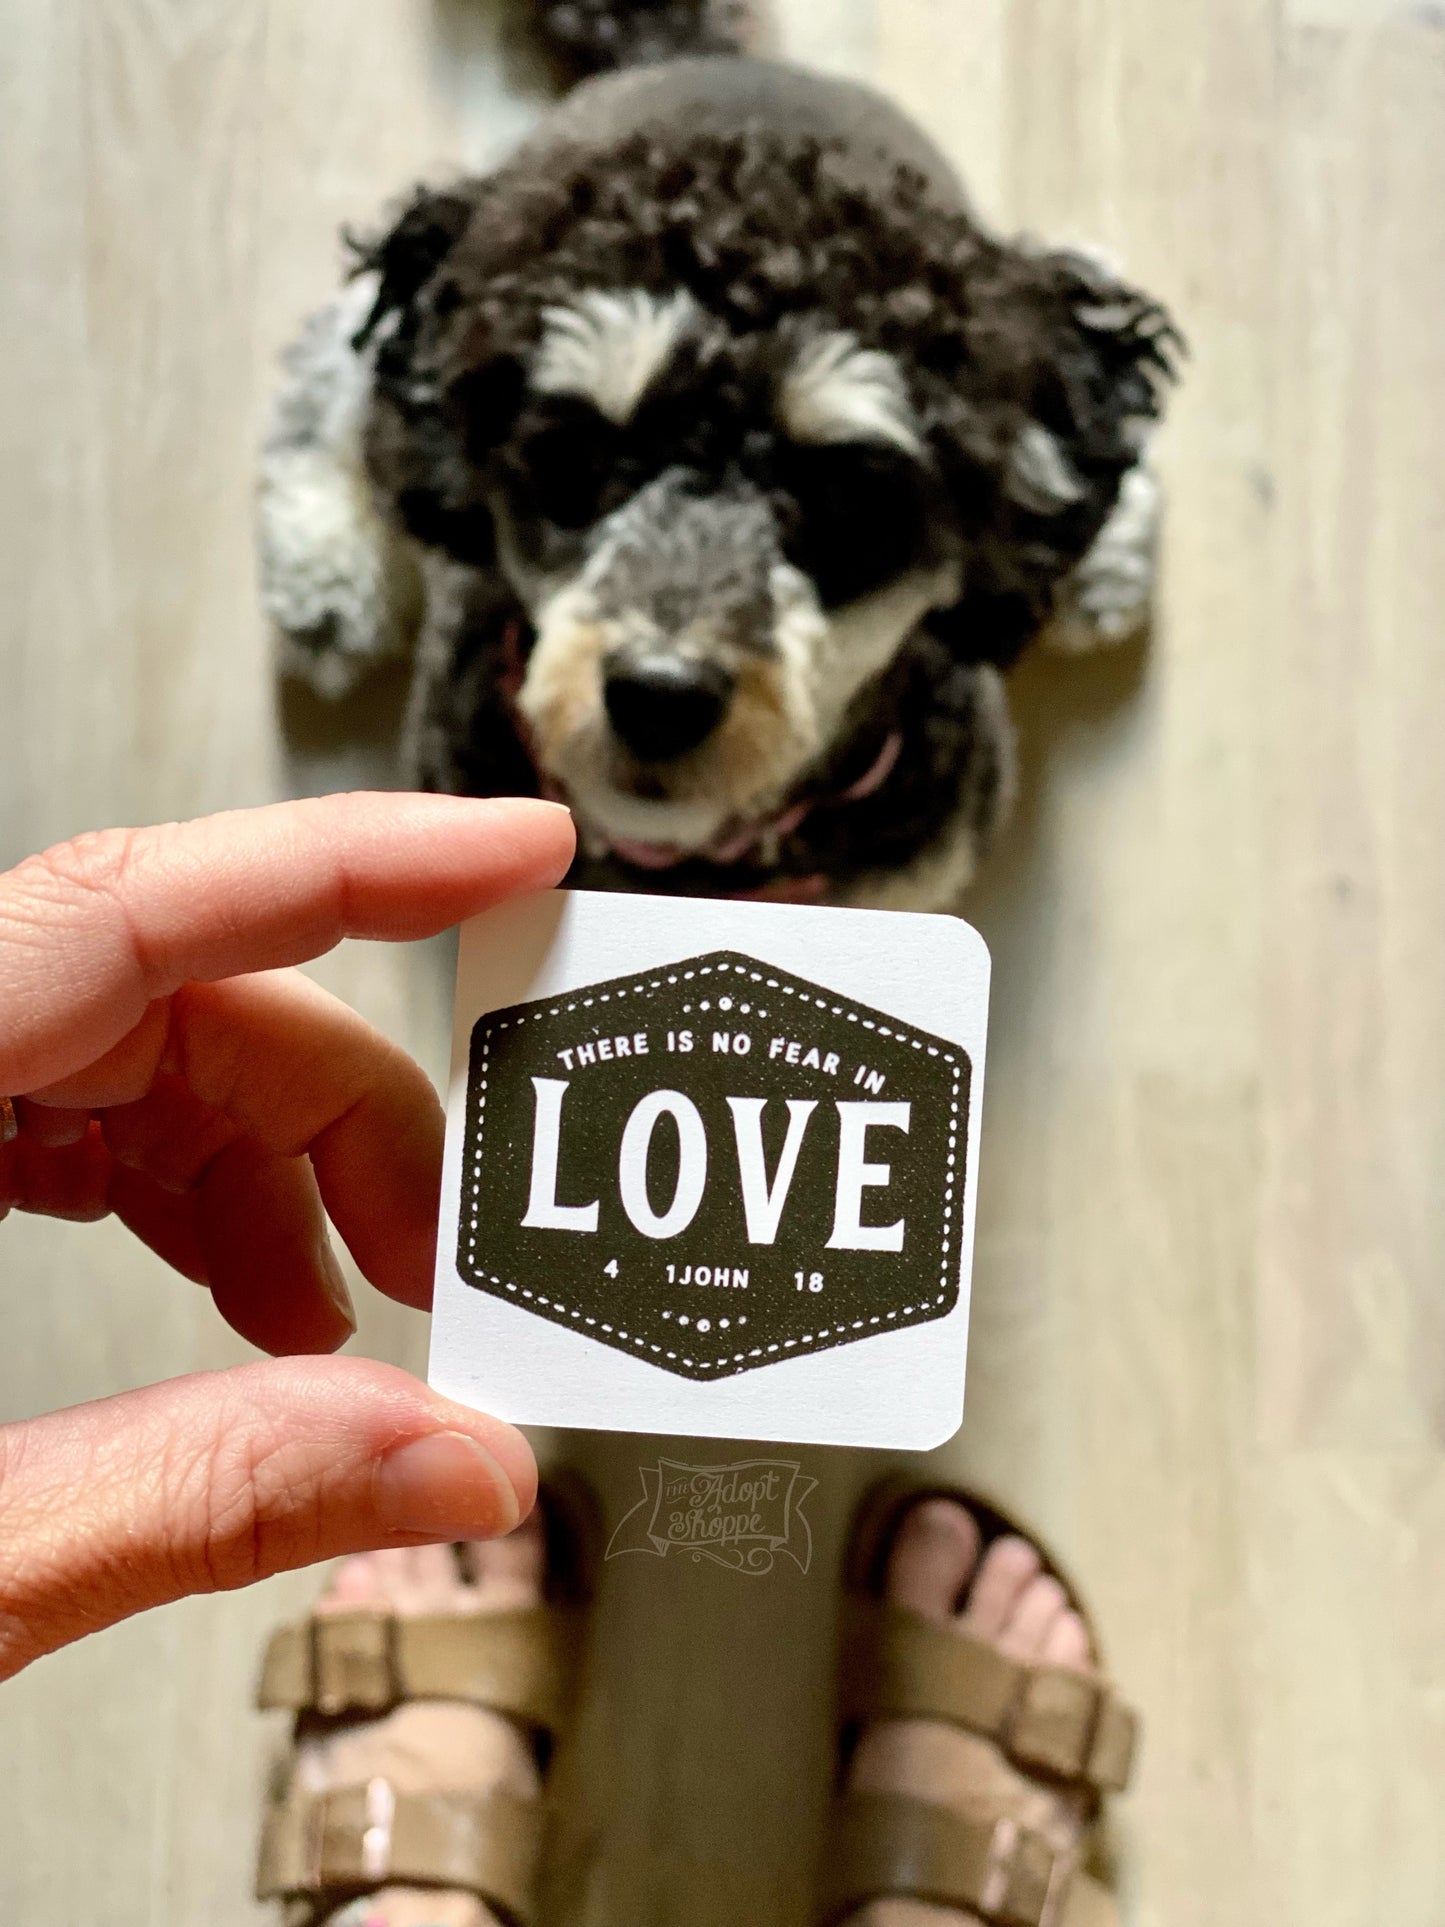 there is no fear in love (1 John 4:18) #TheAdoptShoppecard